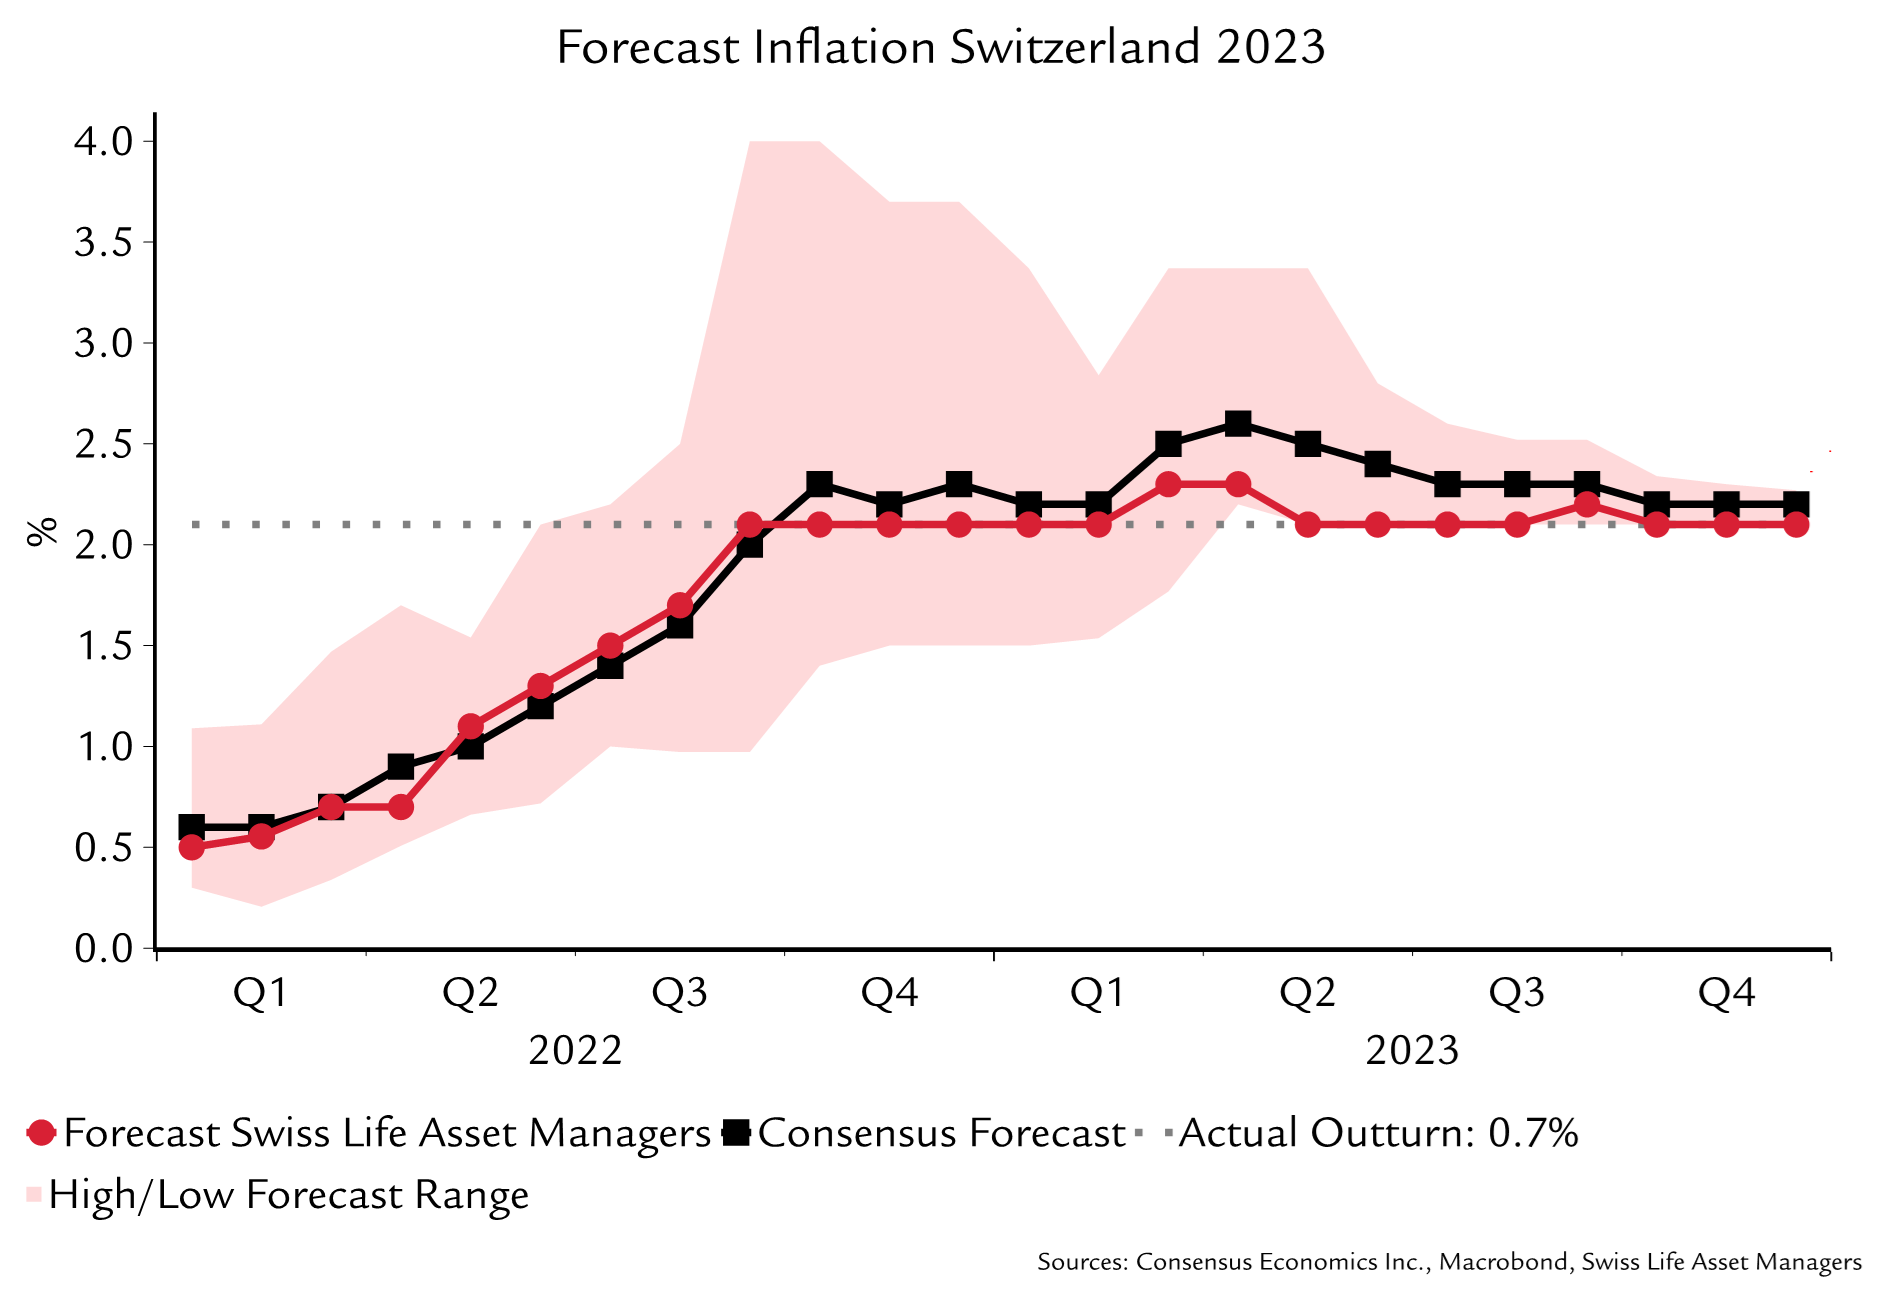 2023 inflation Switzerland growth forecast and actual result